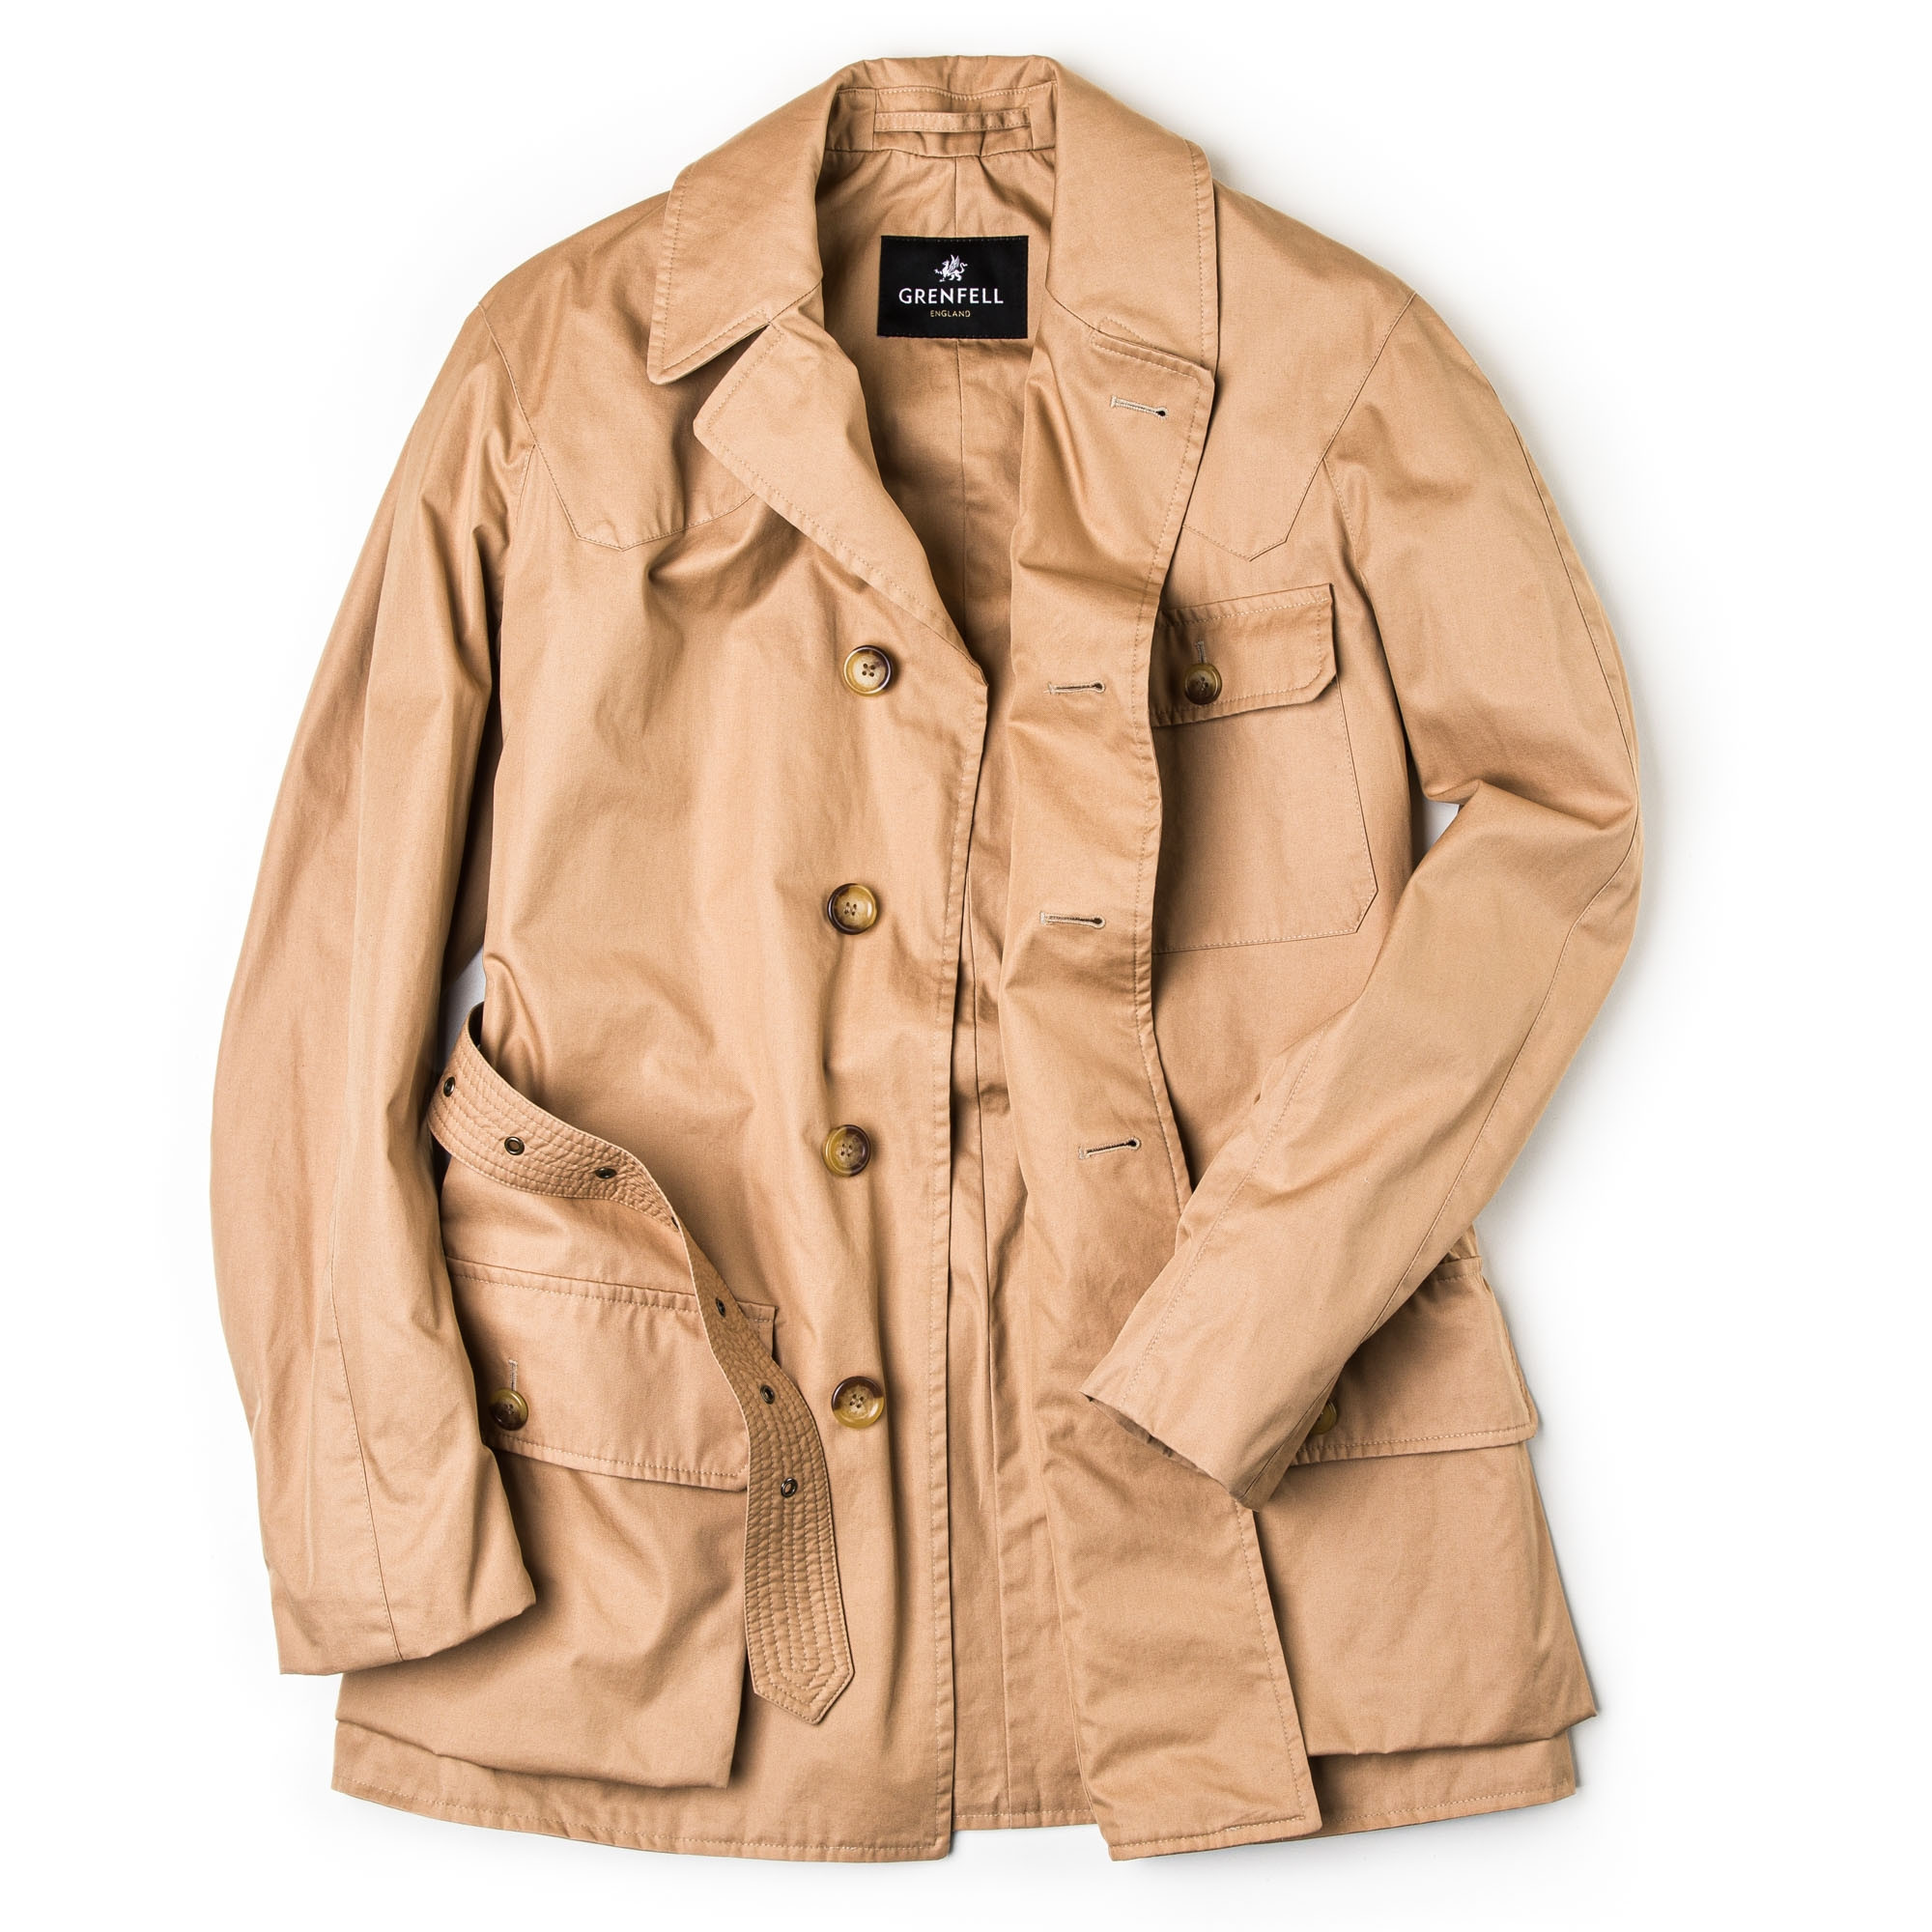 Grenfell/hunting jacket made in England-